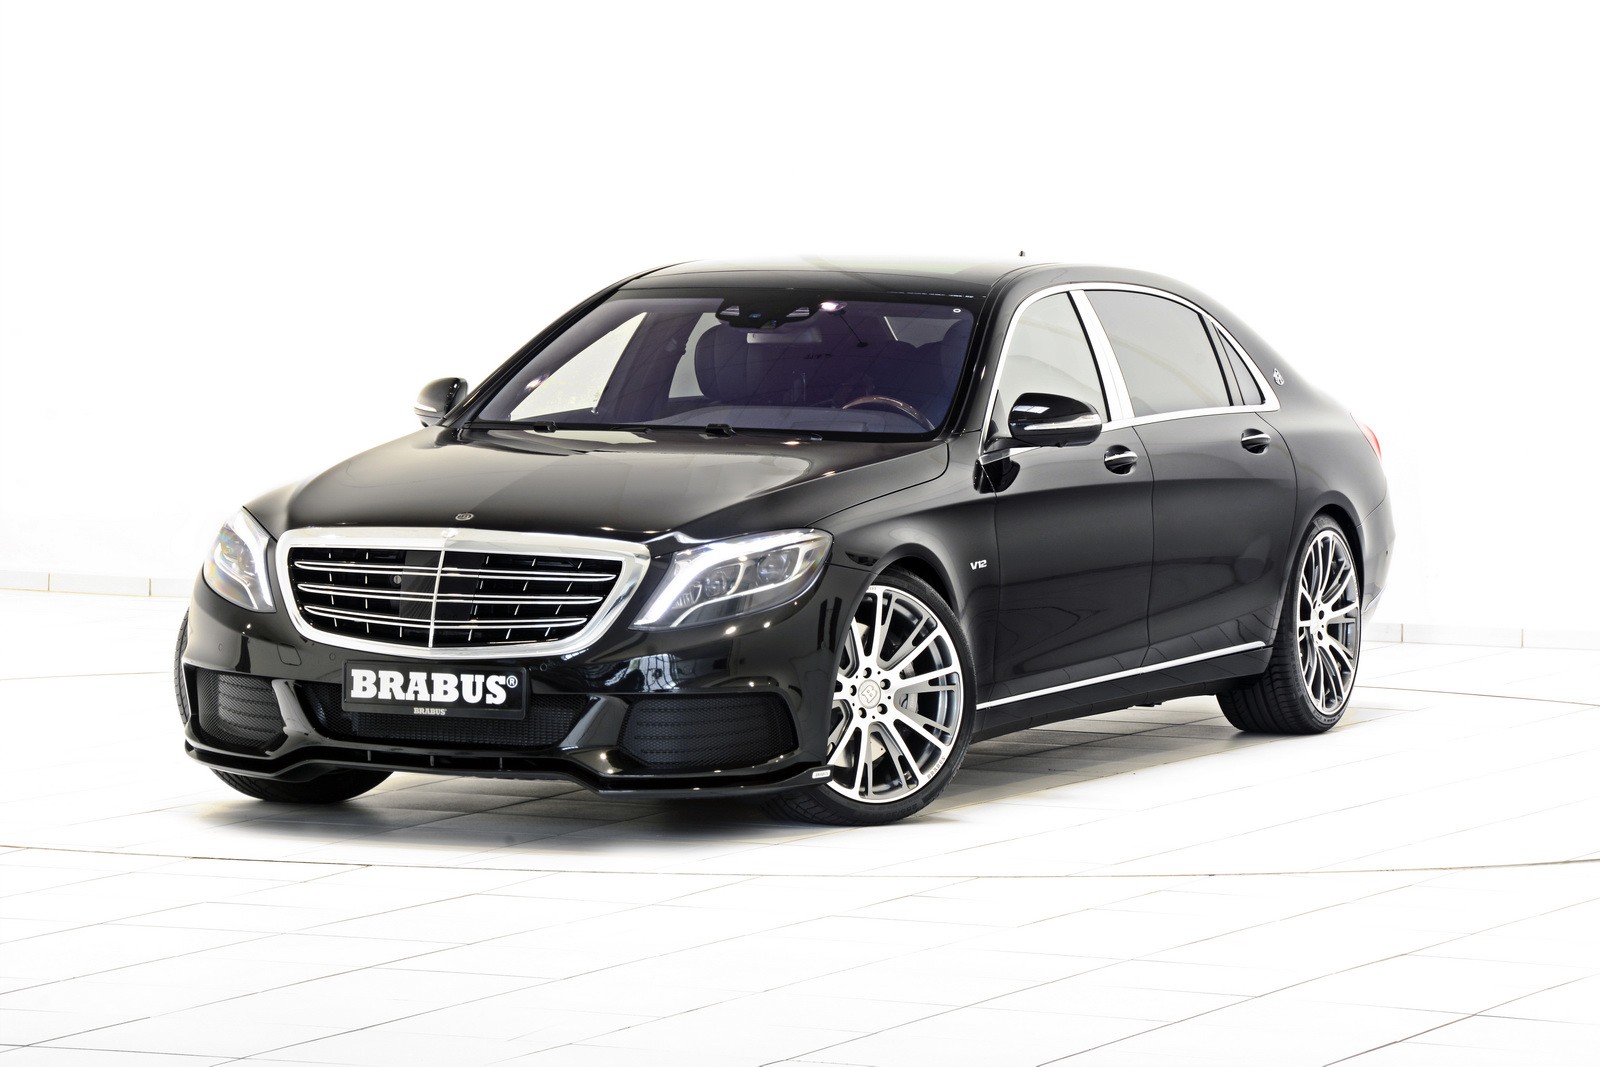 Brabus Throws 900 HP into the Mercedes-Maybach S600, Casts Opulent Interior  - autoevolution